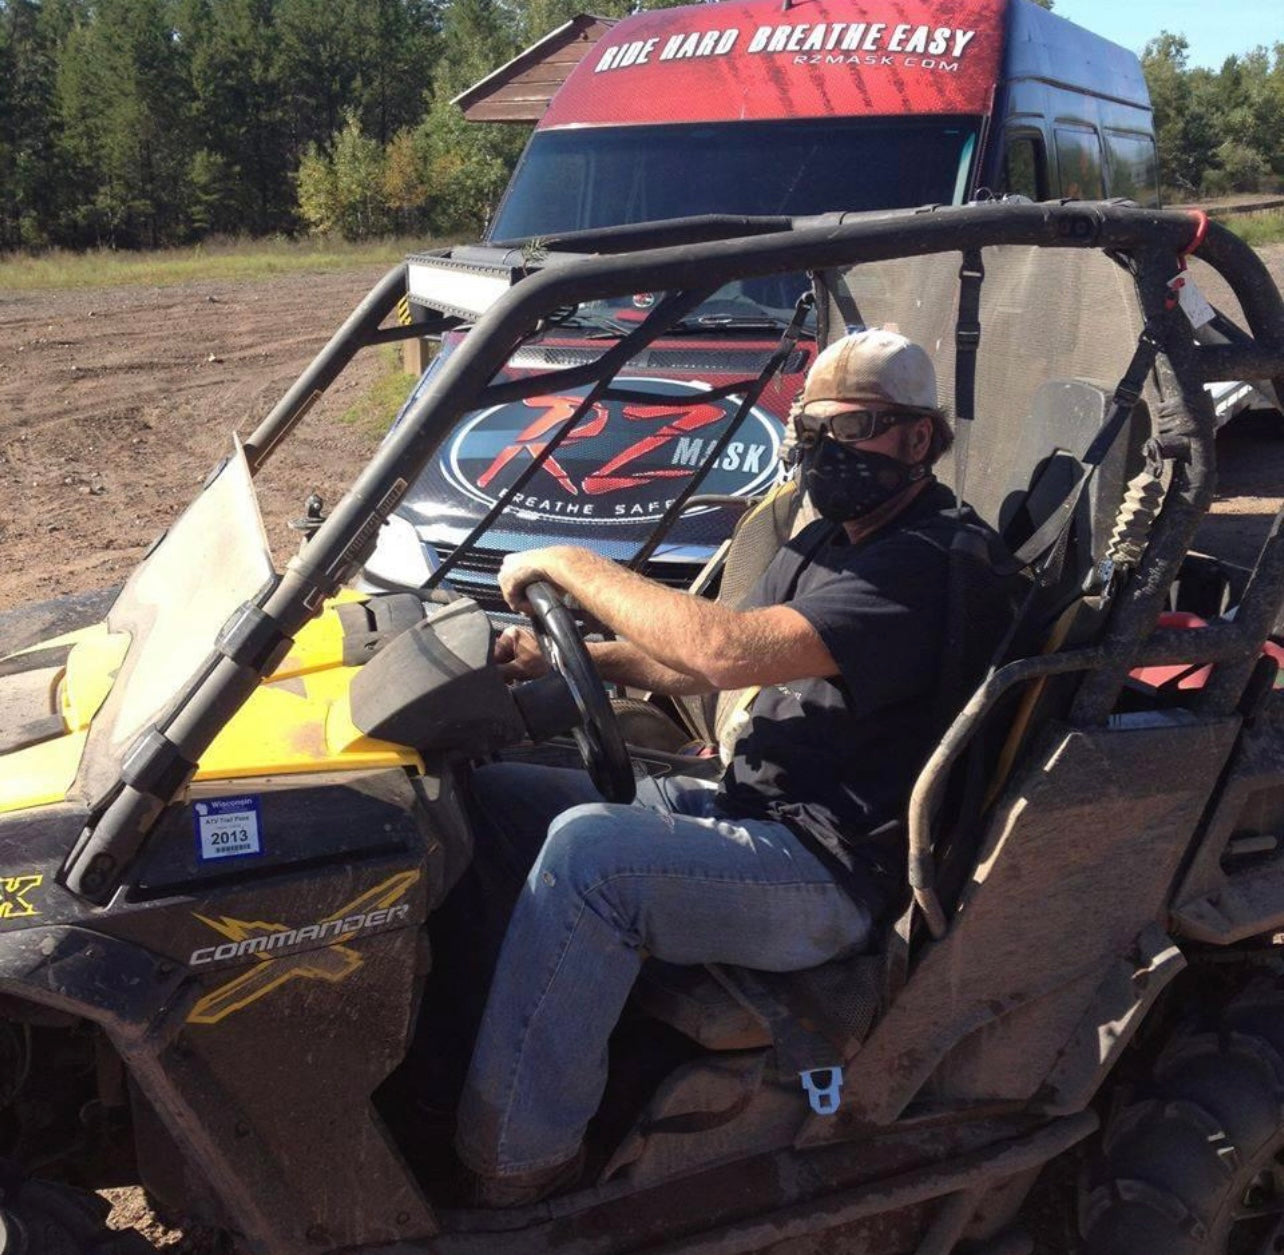 Man in a UTV wearing an RZ Mask M1 Black mask to protect from dust while on the trail. There is a van with the RZ Mask logo in the background.